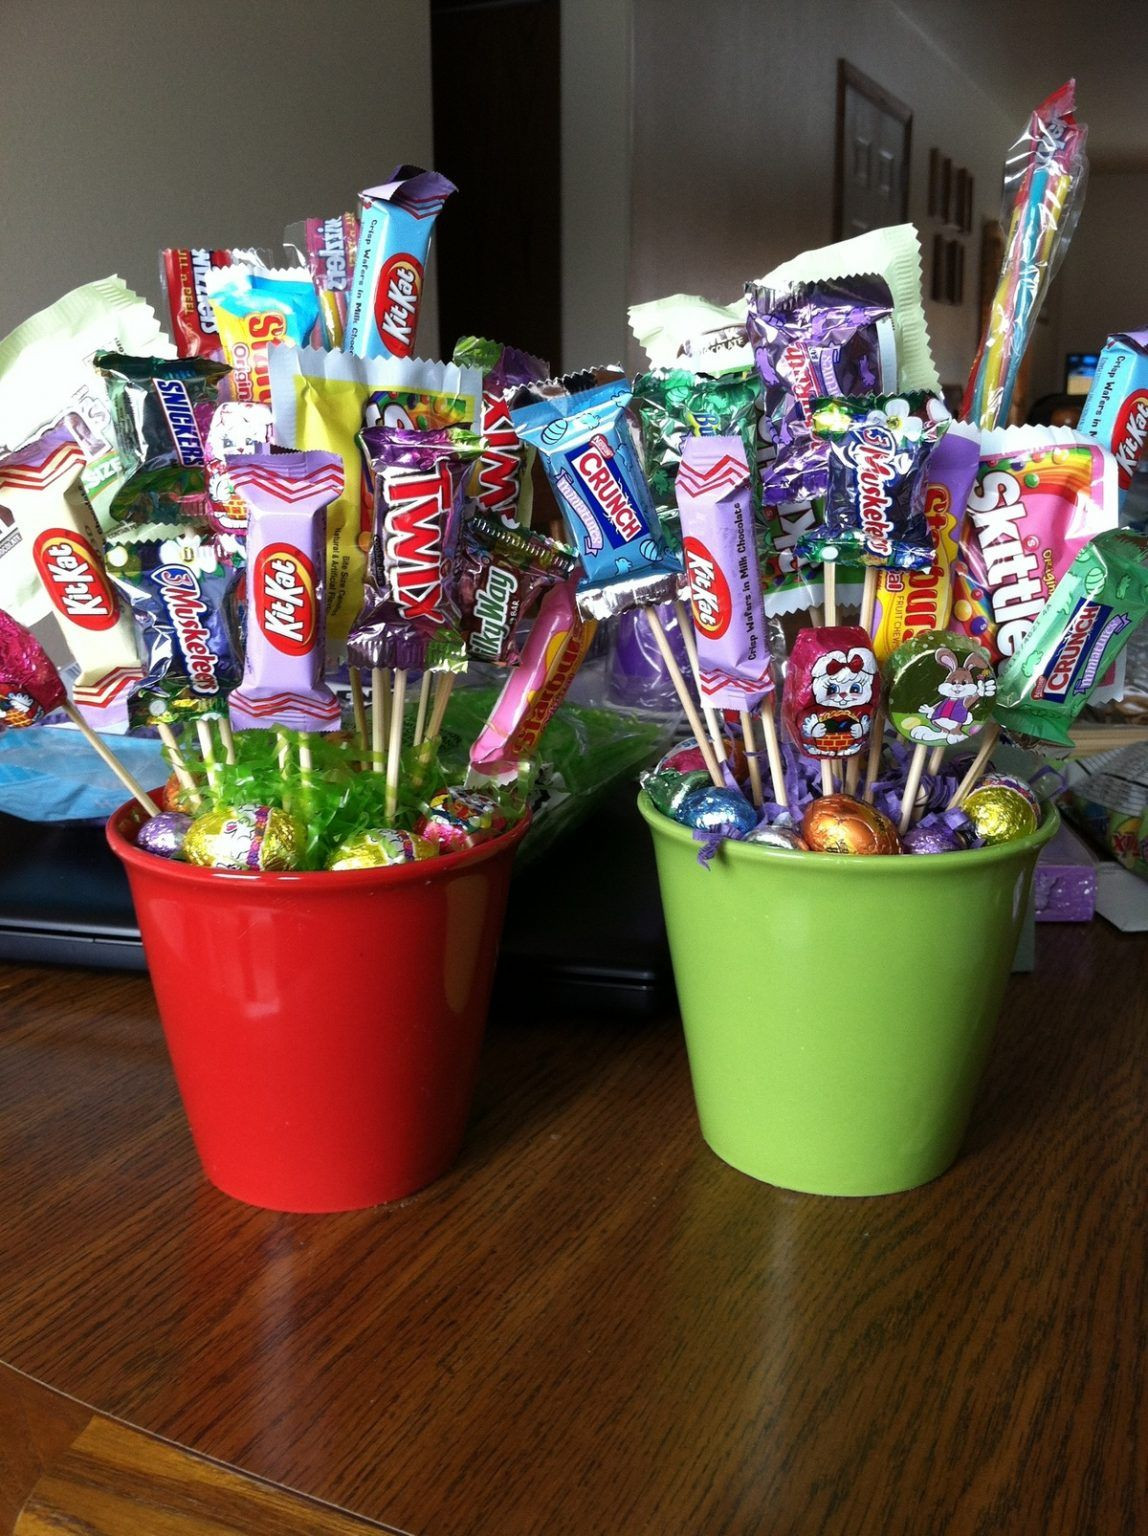 Candy Baskets For Valentines Day
 60 Adorable DIY Valentine s Day Gift Baskets For Him That